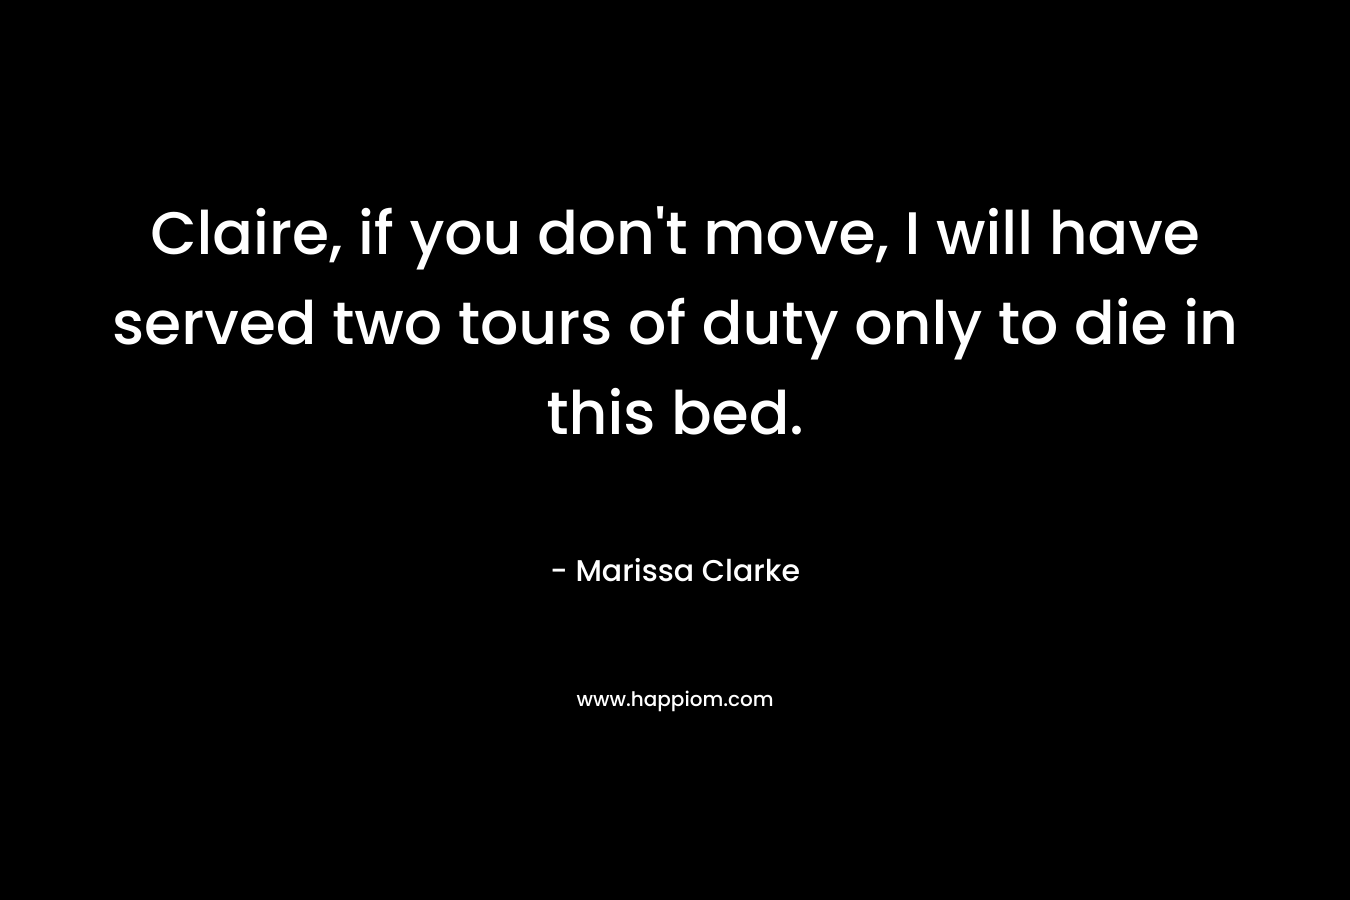 Claire, if you don’t move, I will have served two tours of duty only to die in this bed. – Marissa Clarke